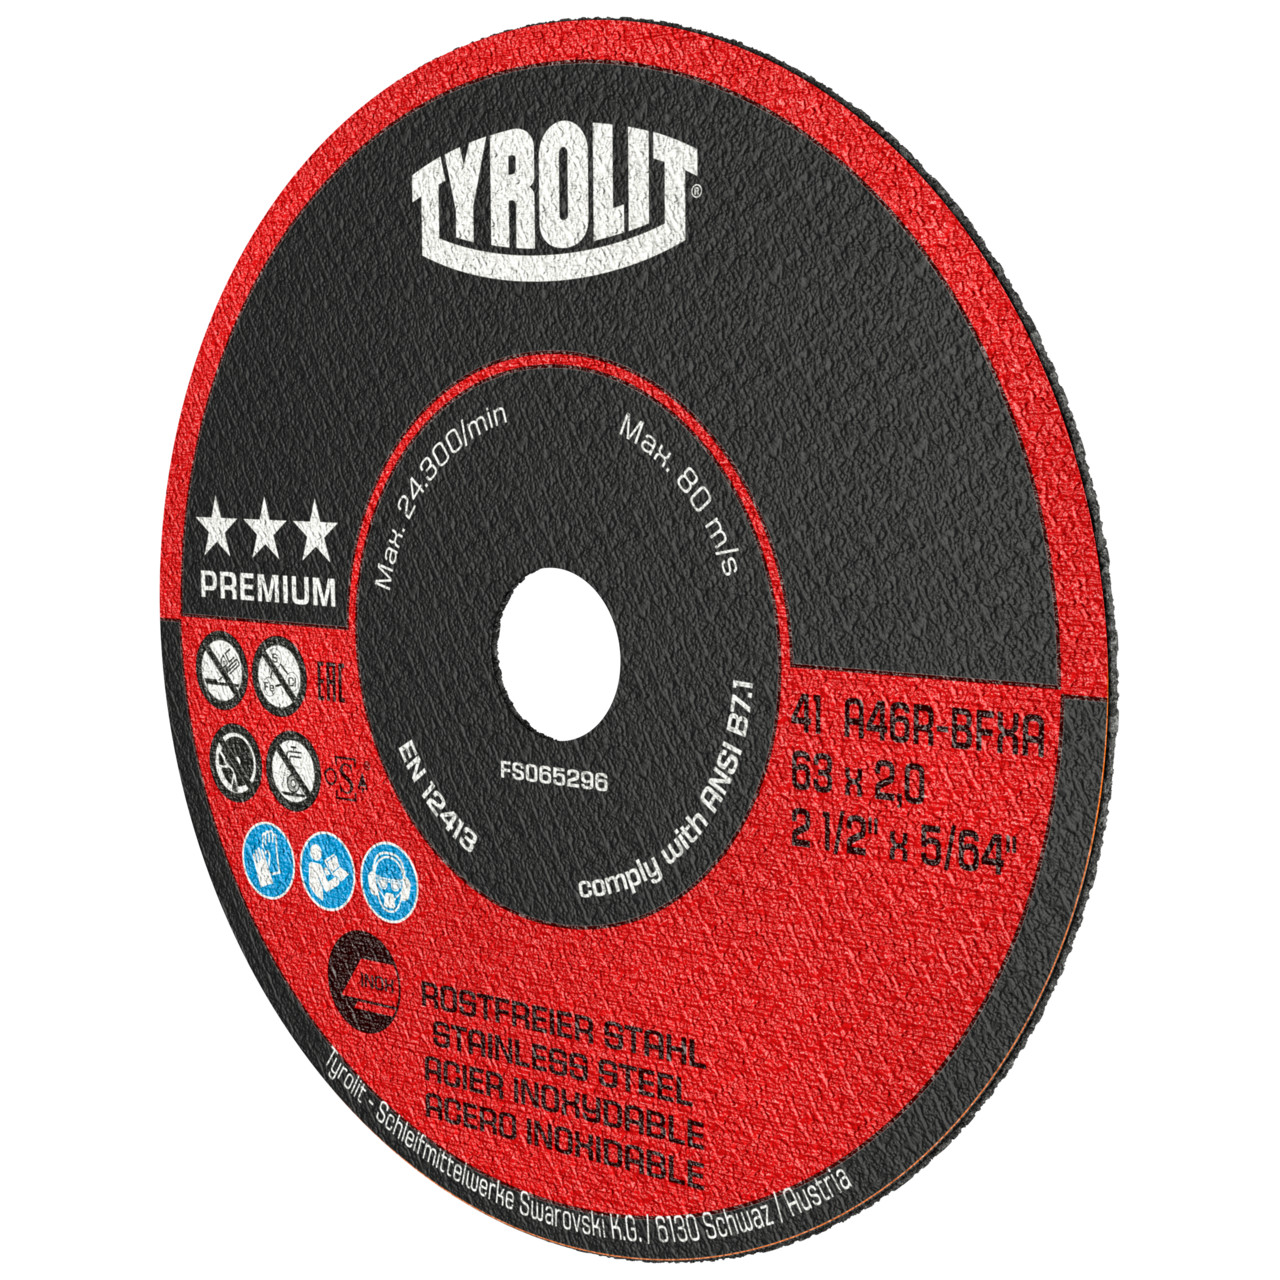 Tyrolit Cutting discs DxDxH 75x2x8 For stainless steel, shape: 41 - straight version, Art. 325224